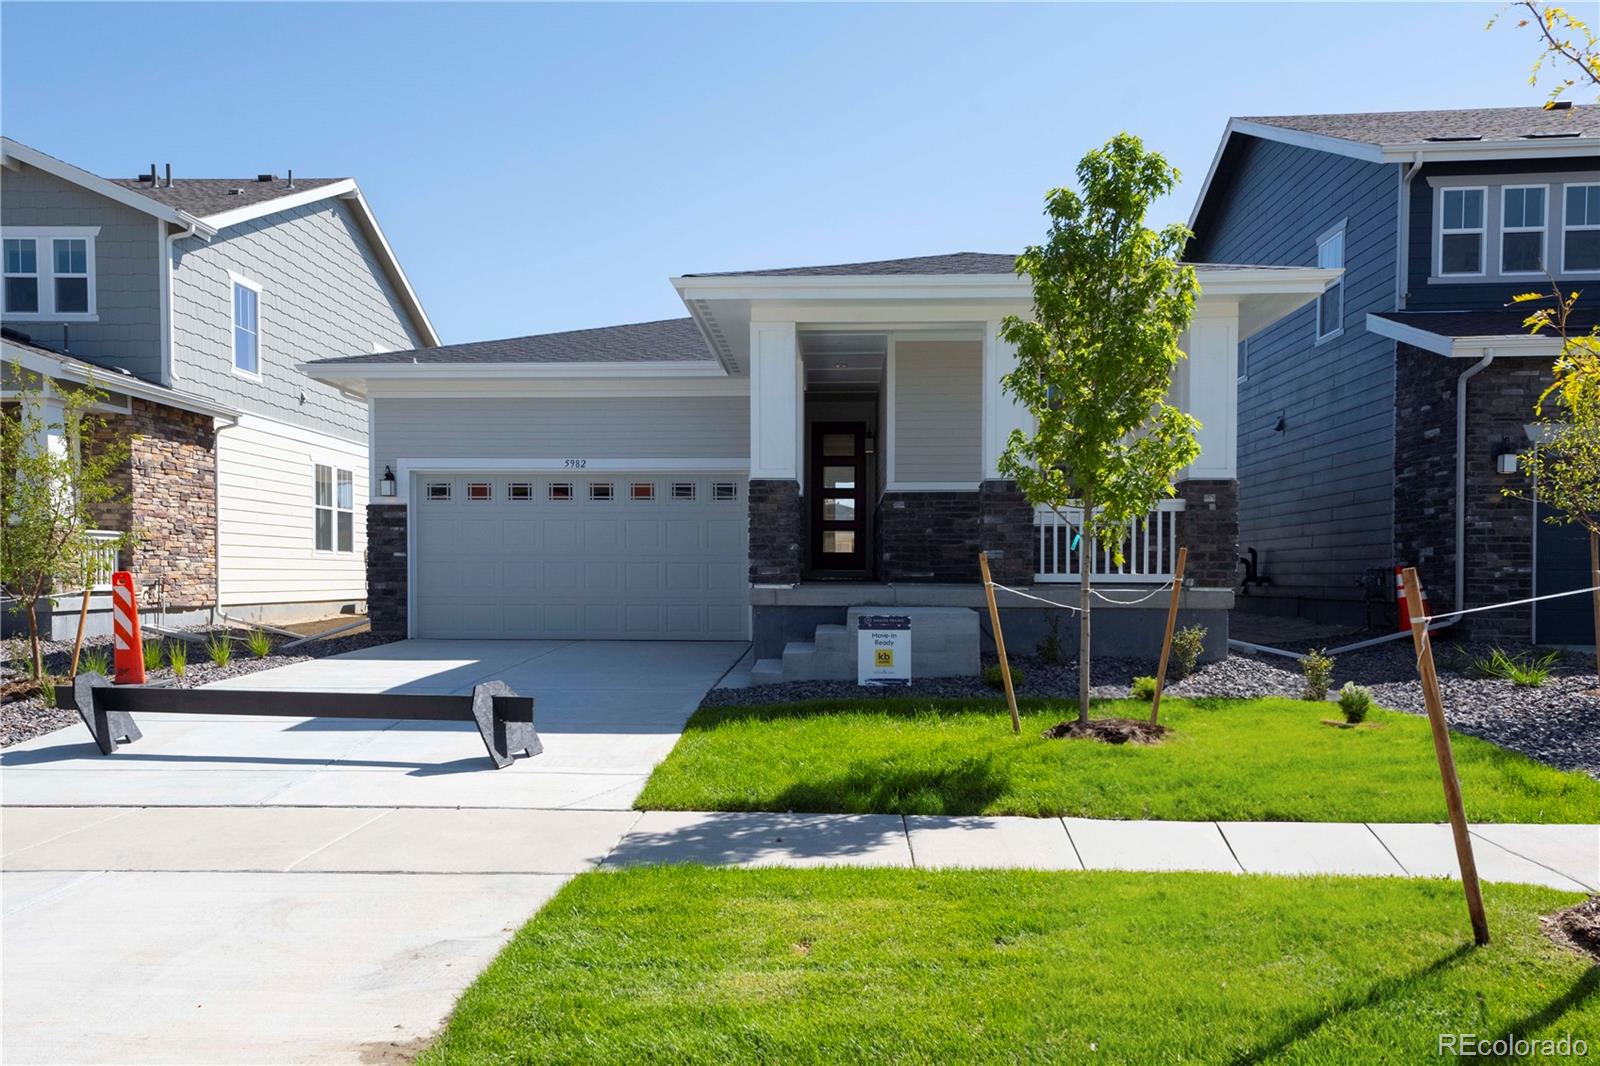 Report Image for 5982 N Liverpool Court,Aurora, Colorado